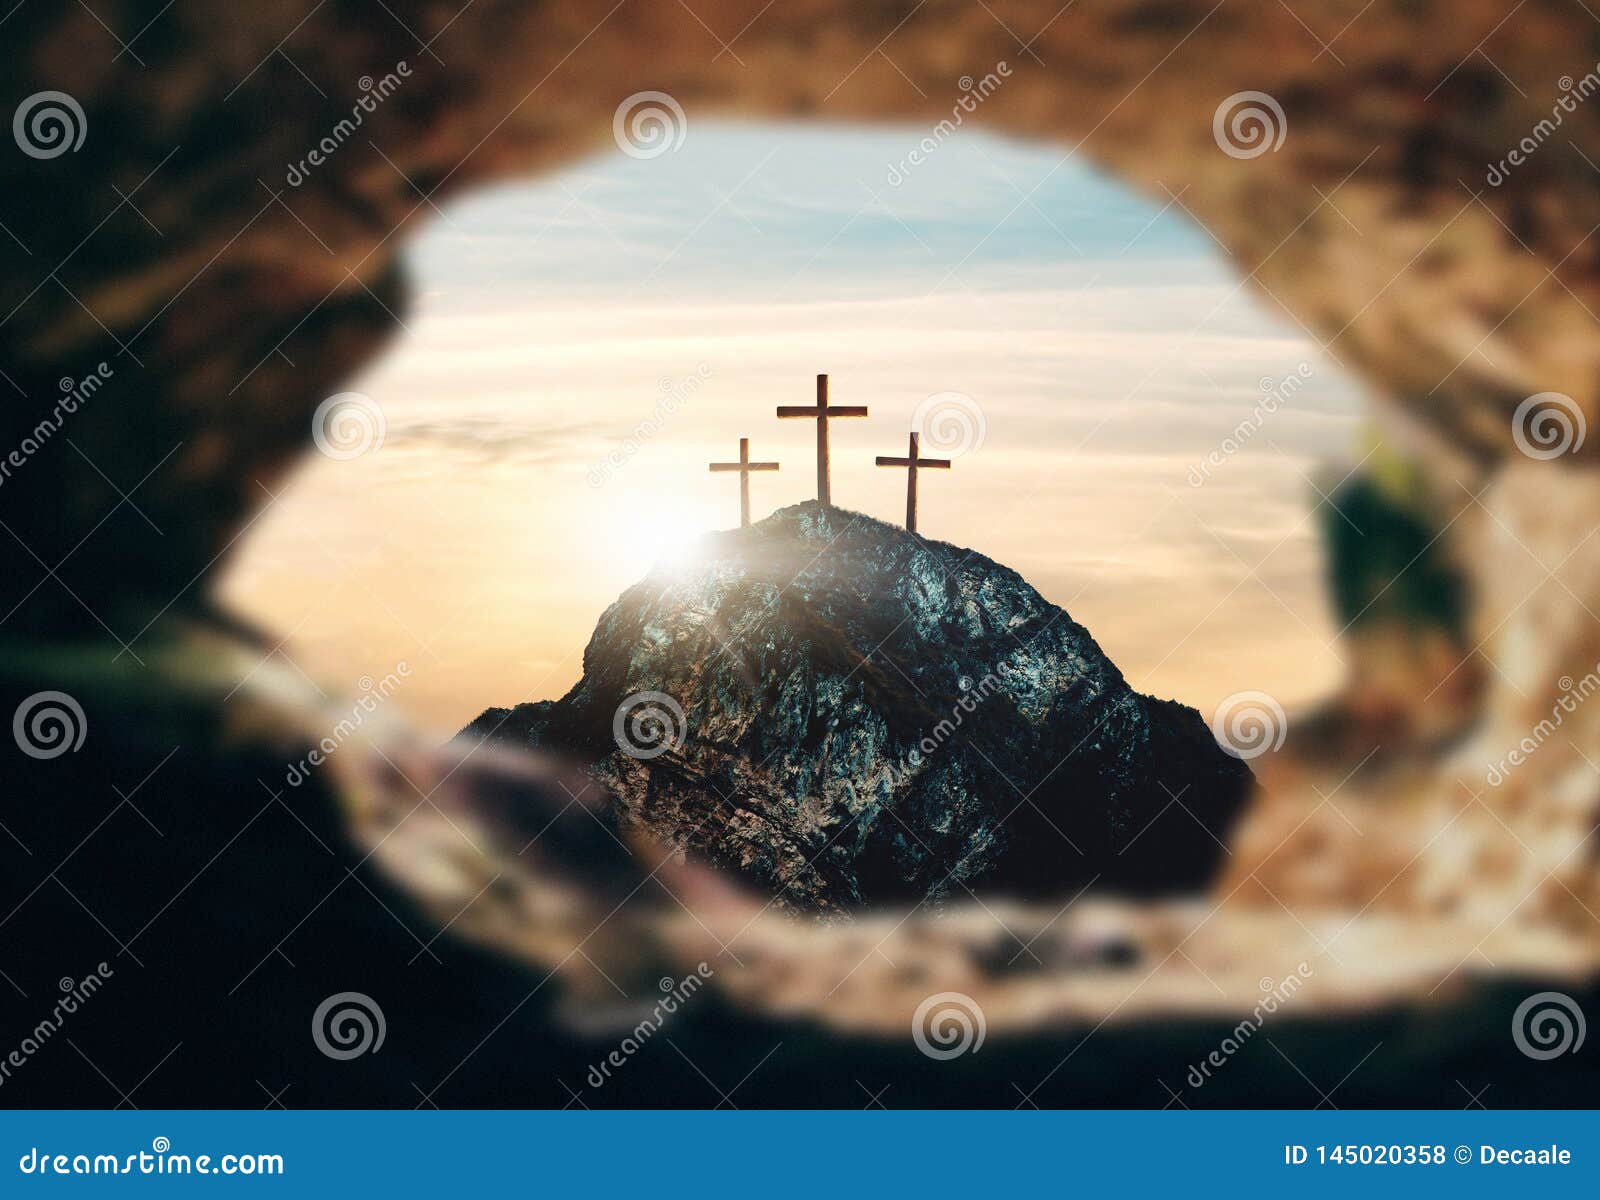 pictures of crosses